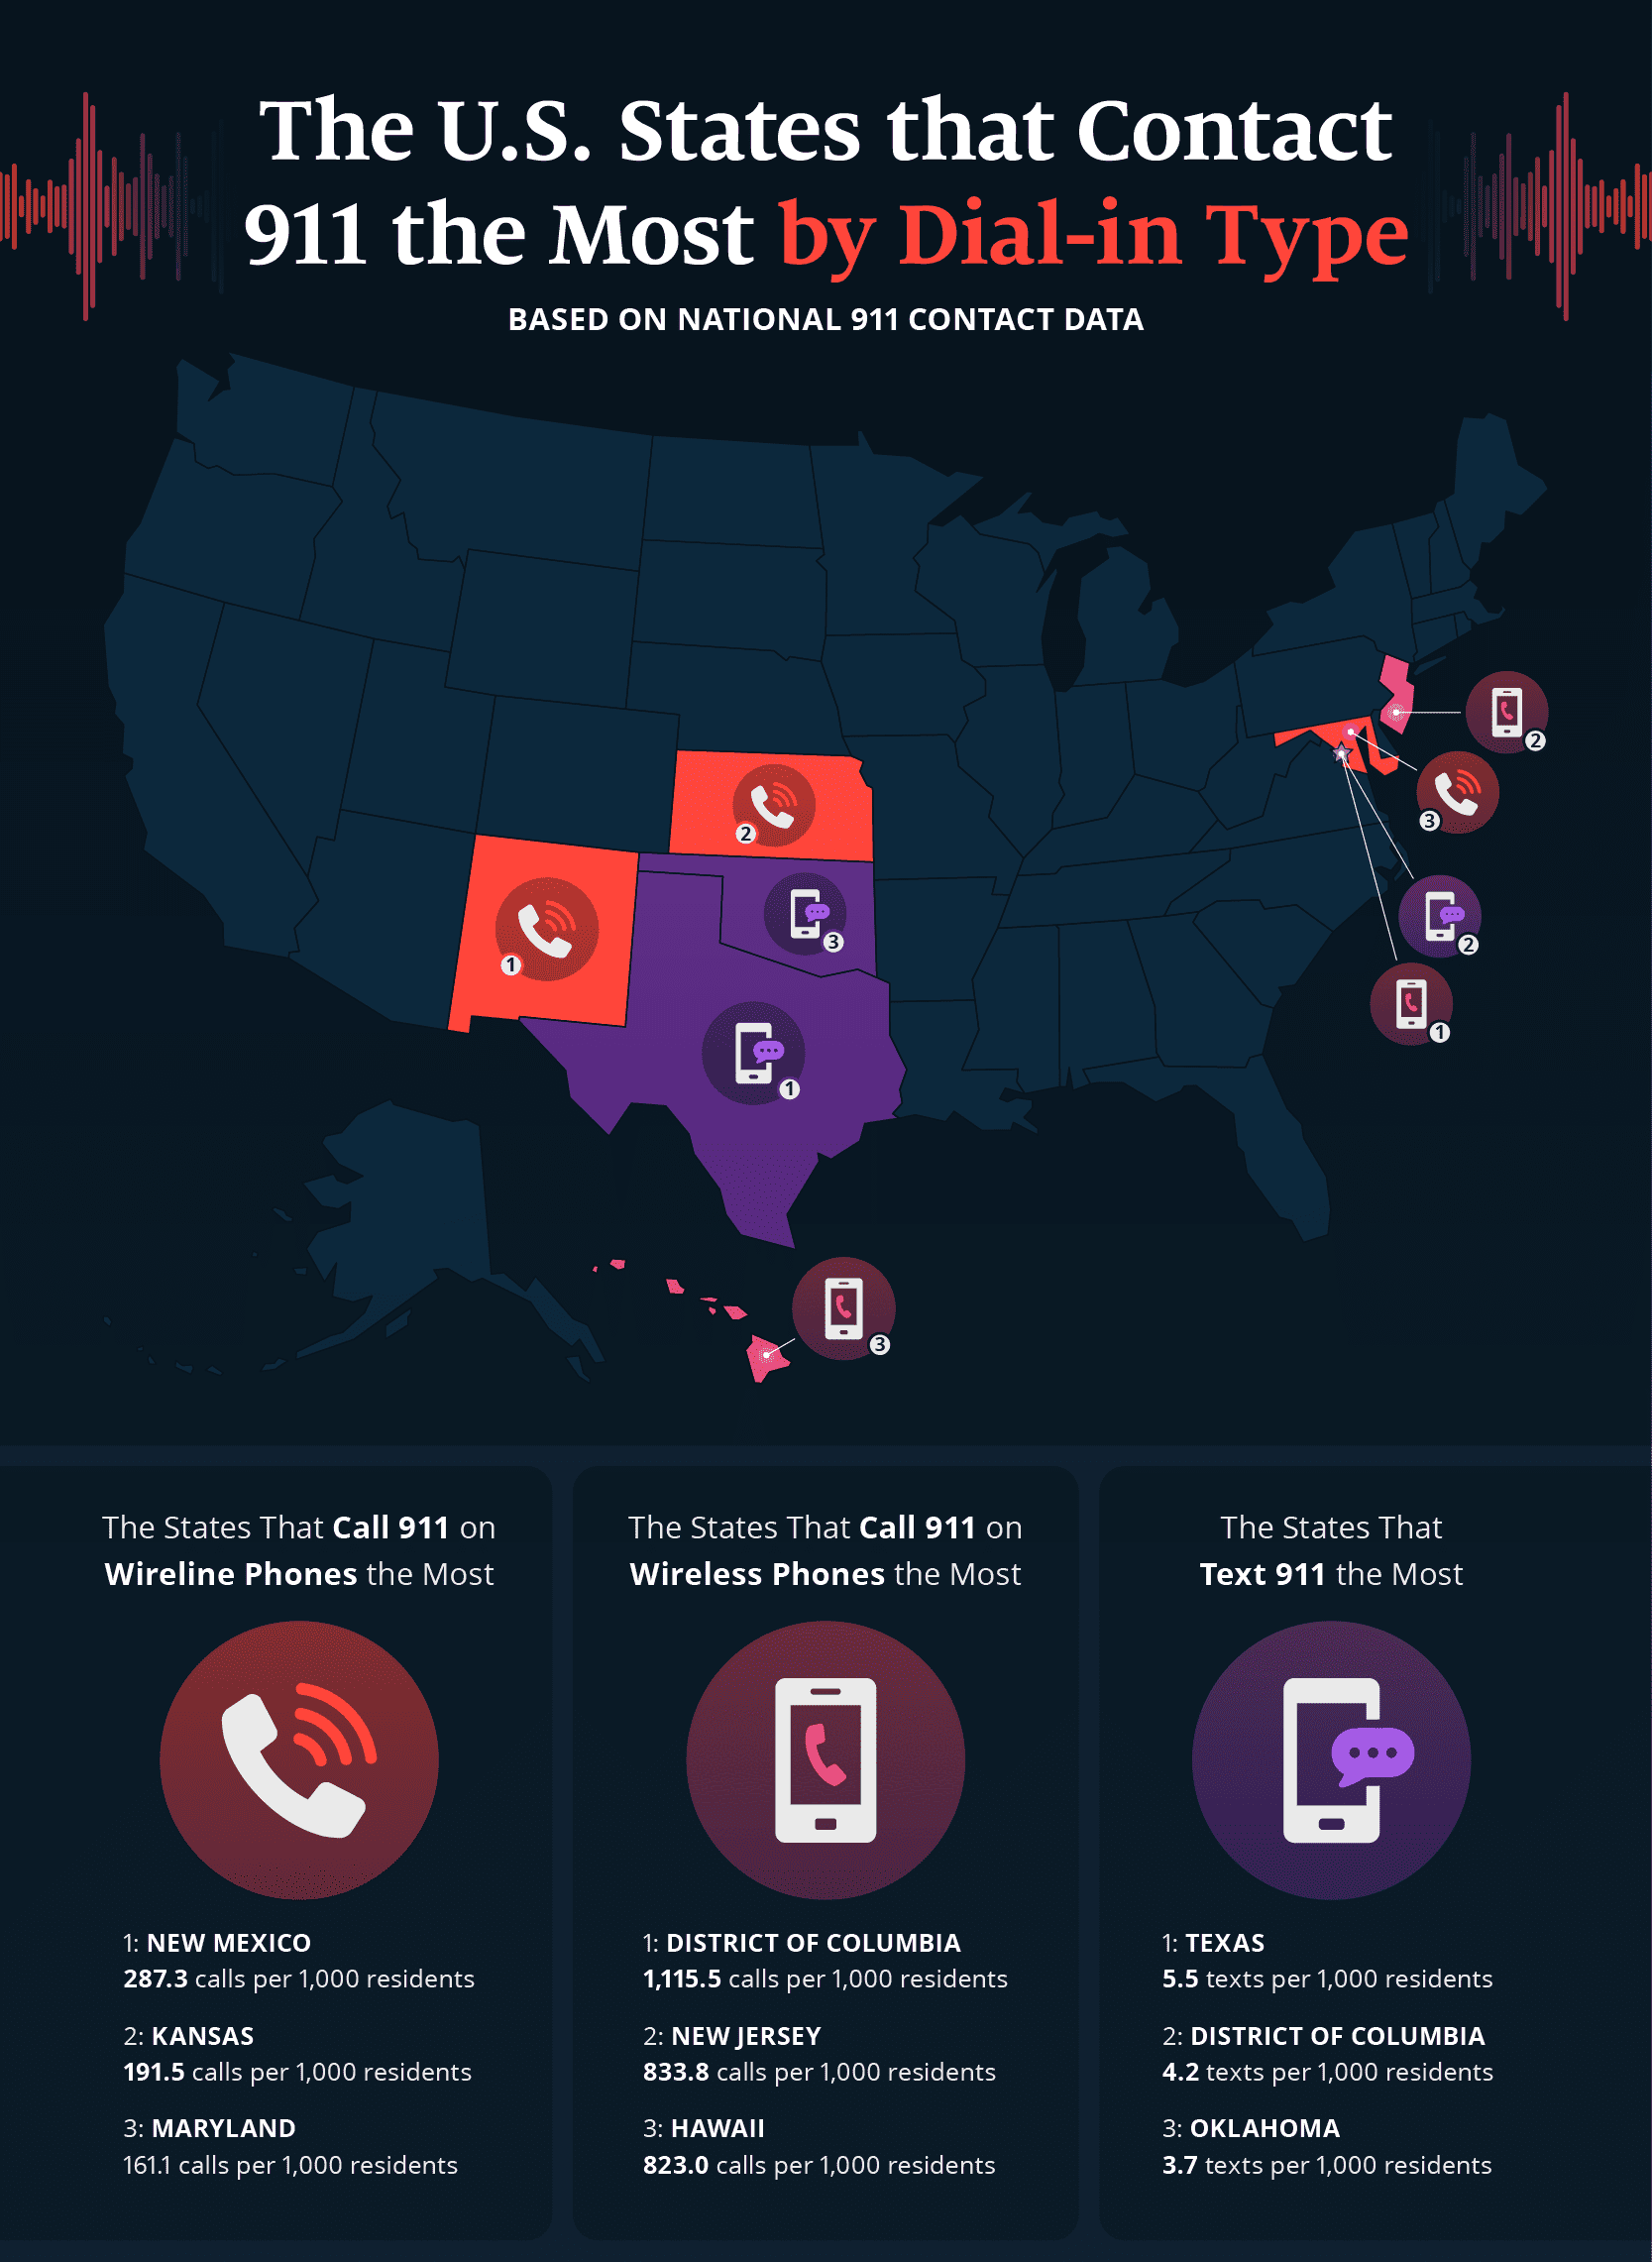 U.S. map highlighting the states that contact 911 the most based on dial-in type.